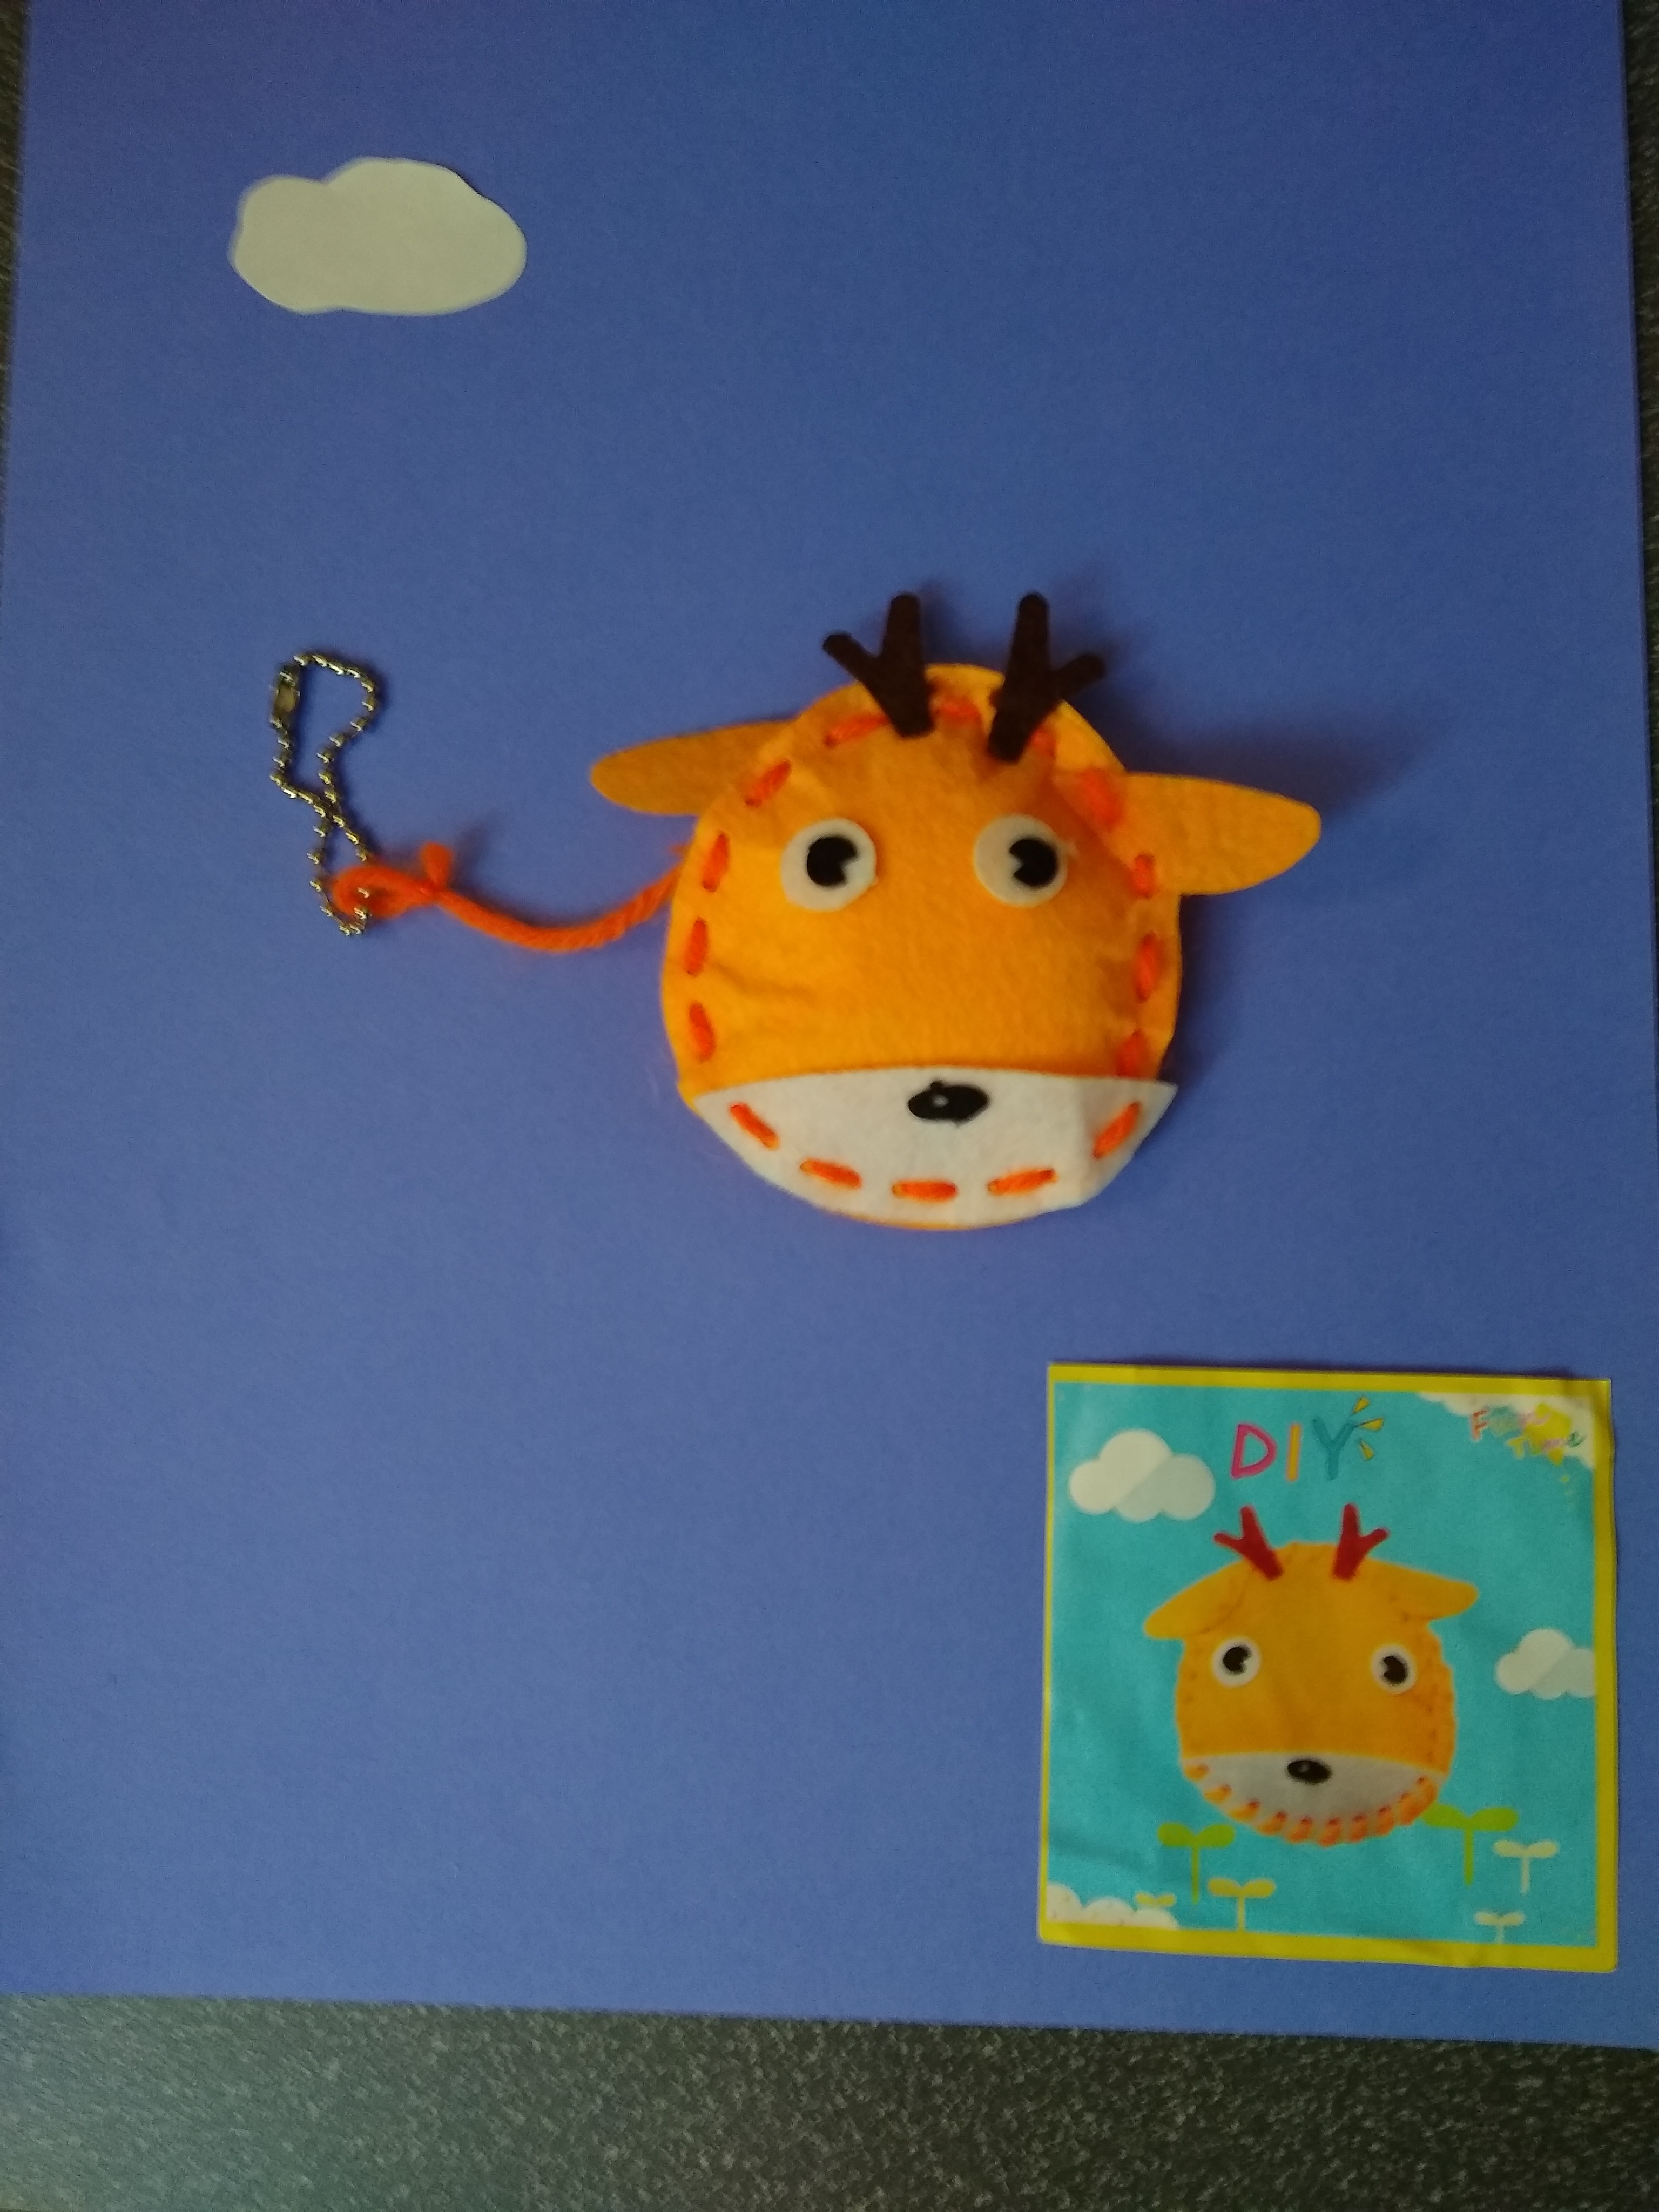 Easy take-away animal sewing craft ! Everything you need to make one of your own is included.